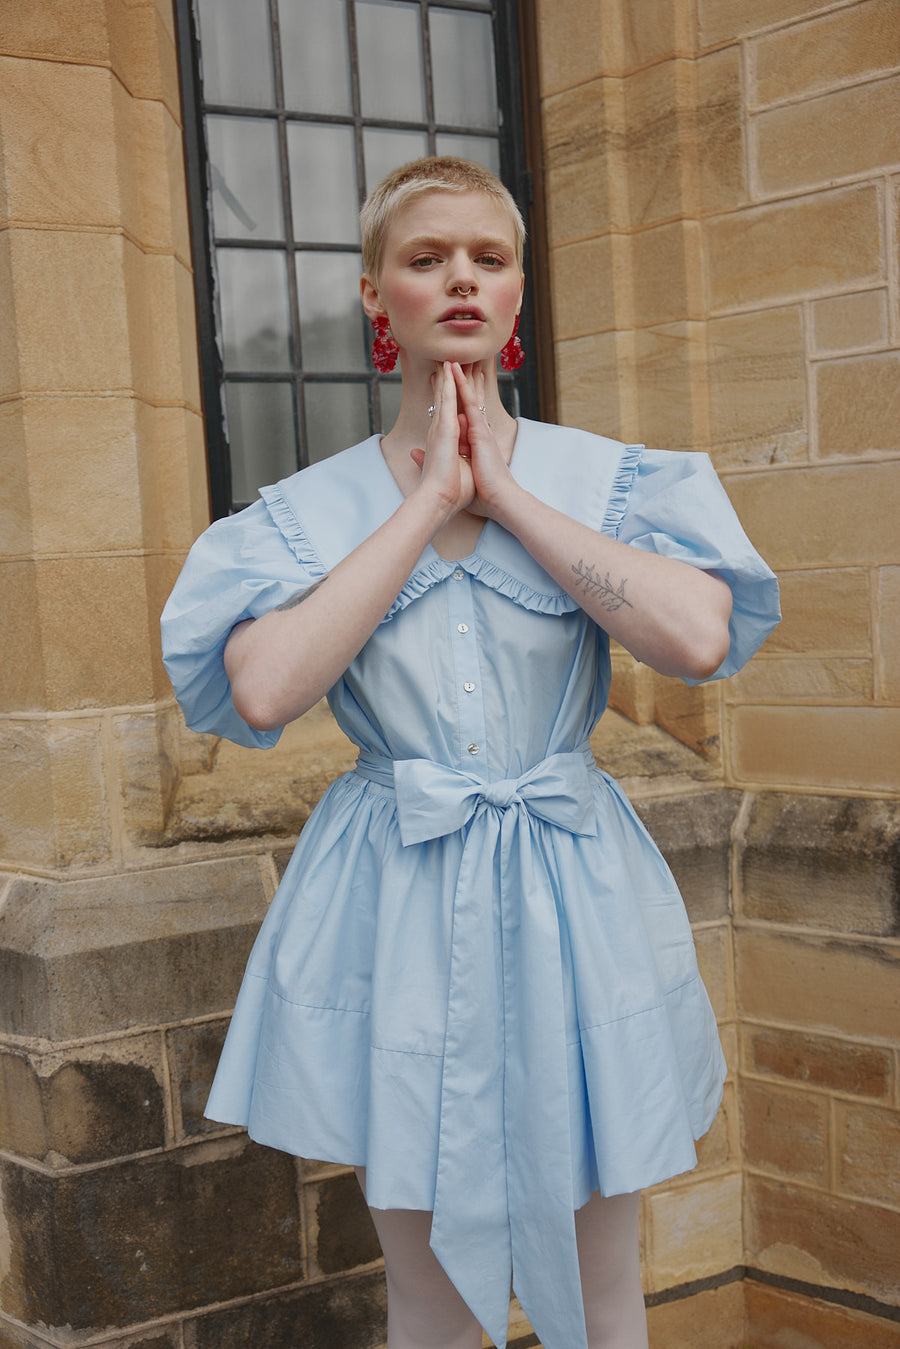 Spring Summer Campaign featuring Hazel Mini Dress in blue cotton by Australian brand House of Campbell.